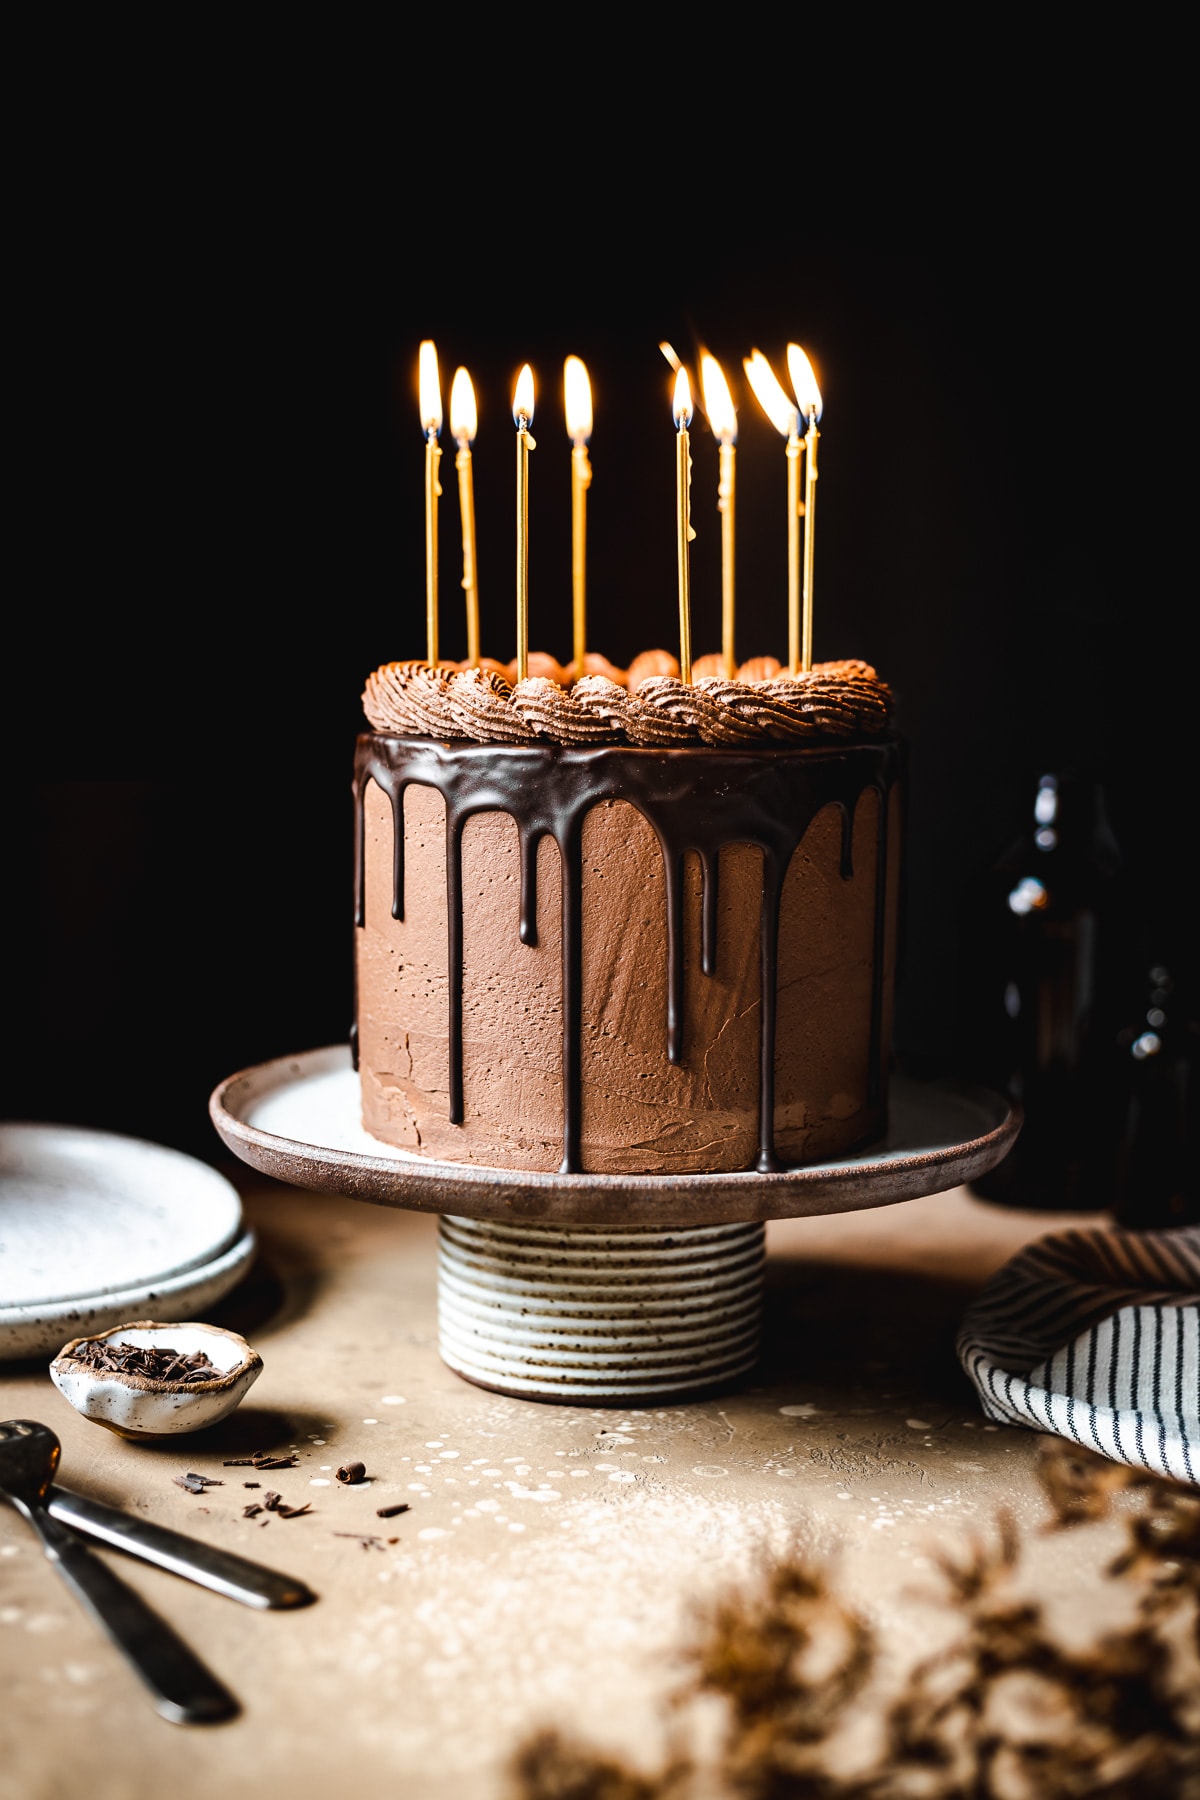 A moody image of a drip cake on a ceramic cake stand on a tan stone surface. The candles on the cake are lit. Plates, a napkin, and forks rest nearby. The background is black.